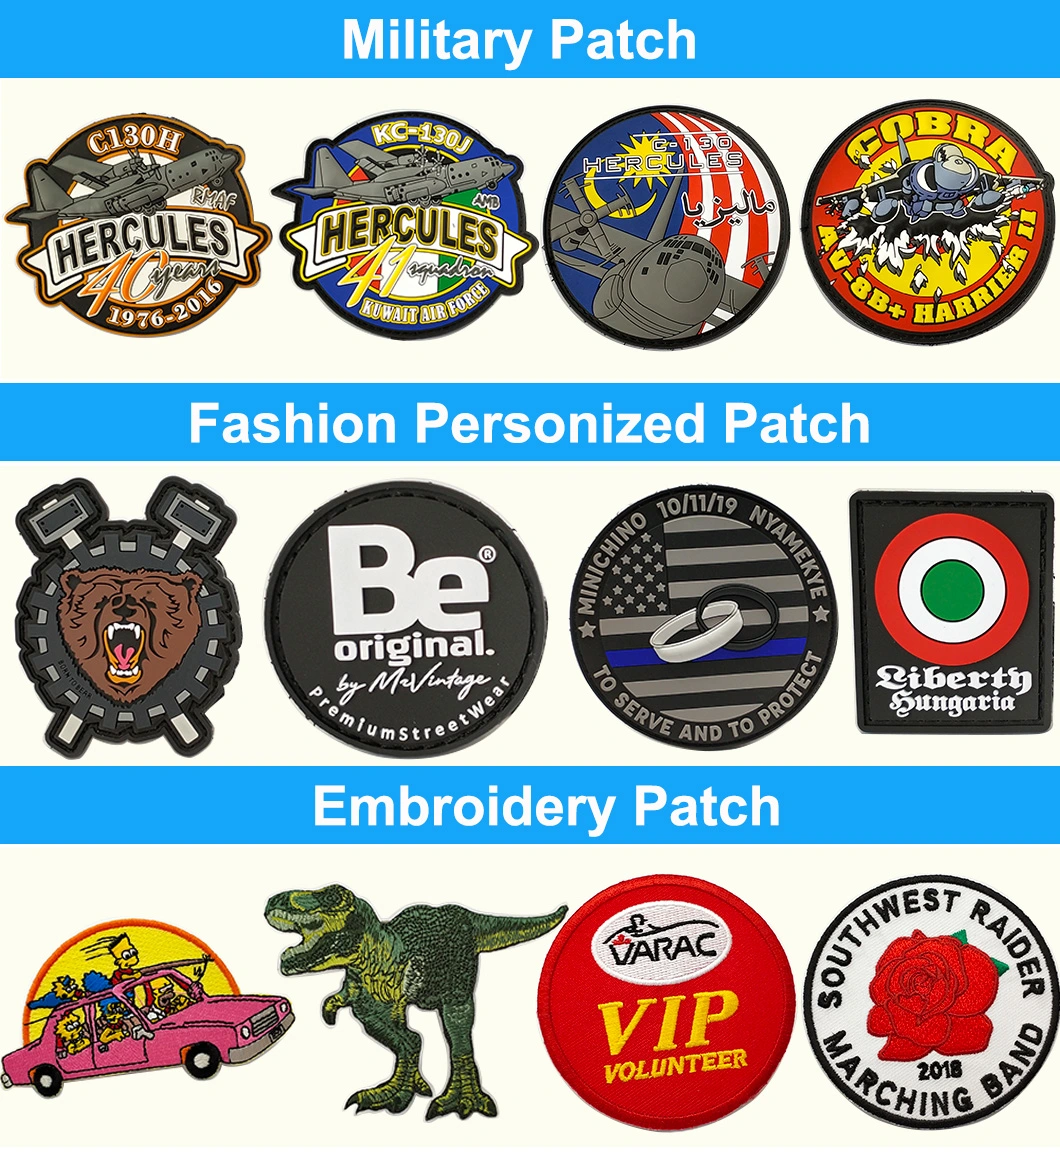 Professional Customized Military Tactical Gear Police Garment Label 3D Clothing Woven Label Printing Sticker PVC Rubber Patches for Promotion Gift (PT36)